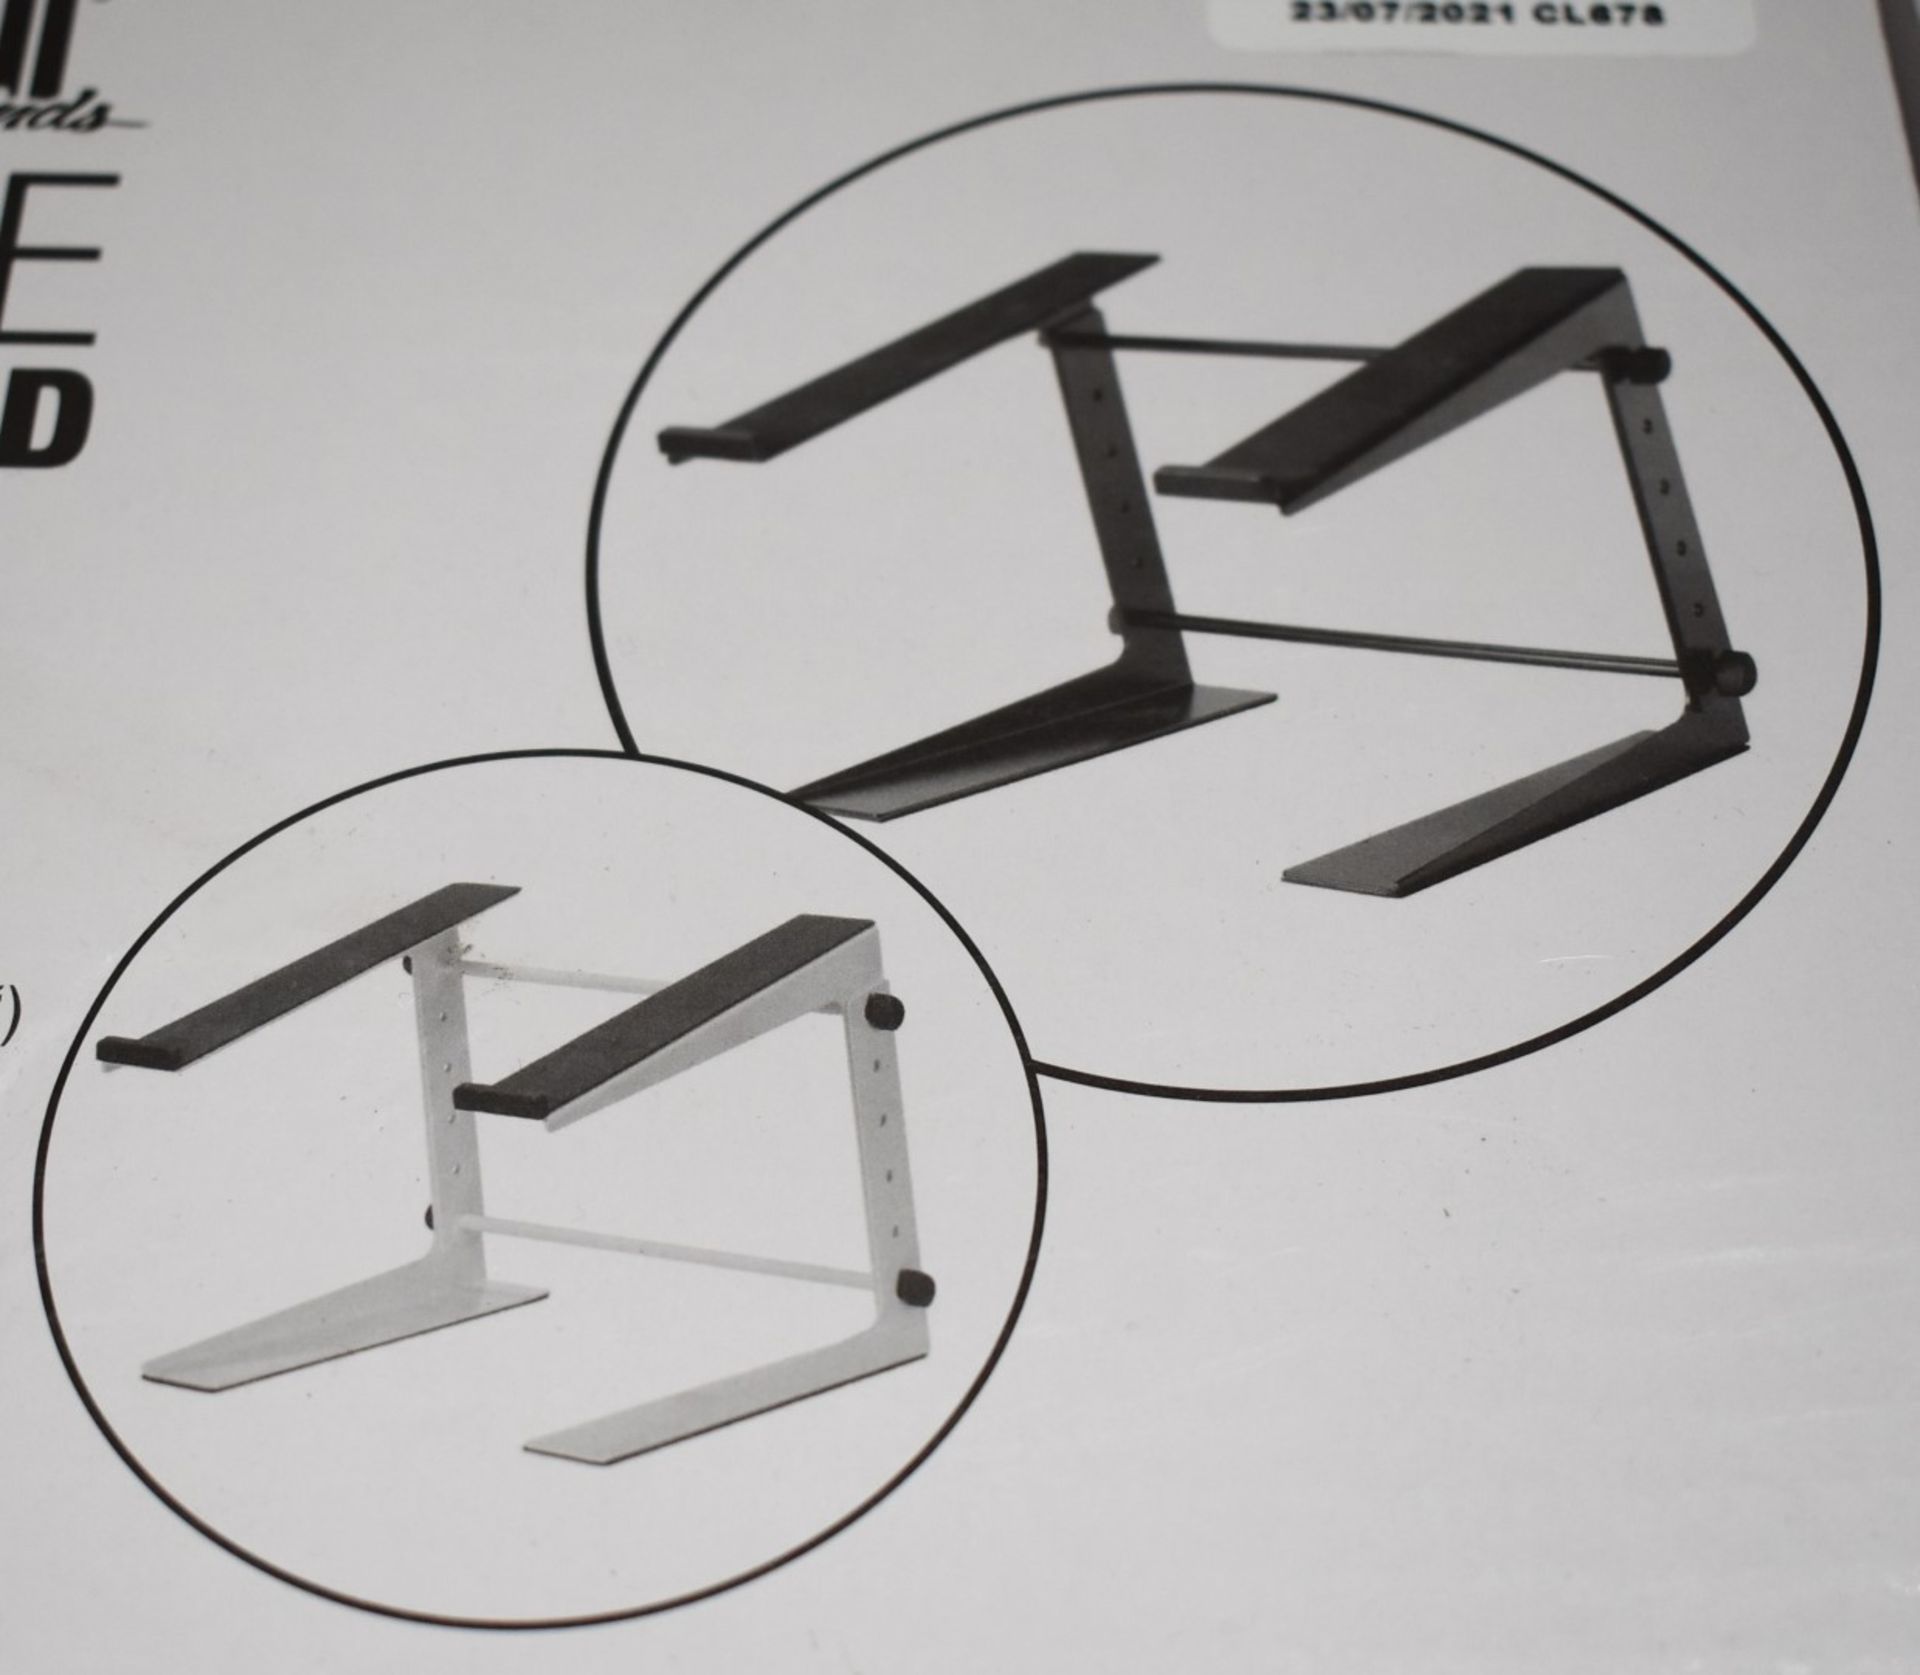 1 x Adam Hall Laptop Stand in Black - New and Boxed - Suitable For 12" - 17" Laptop Formats Type - Image 5 of 5